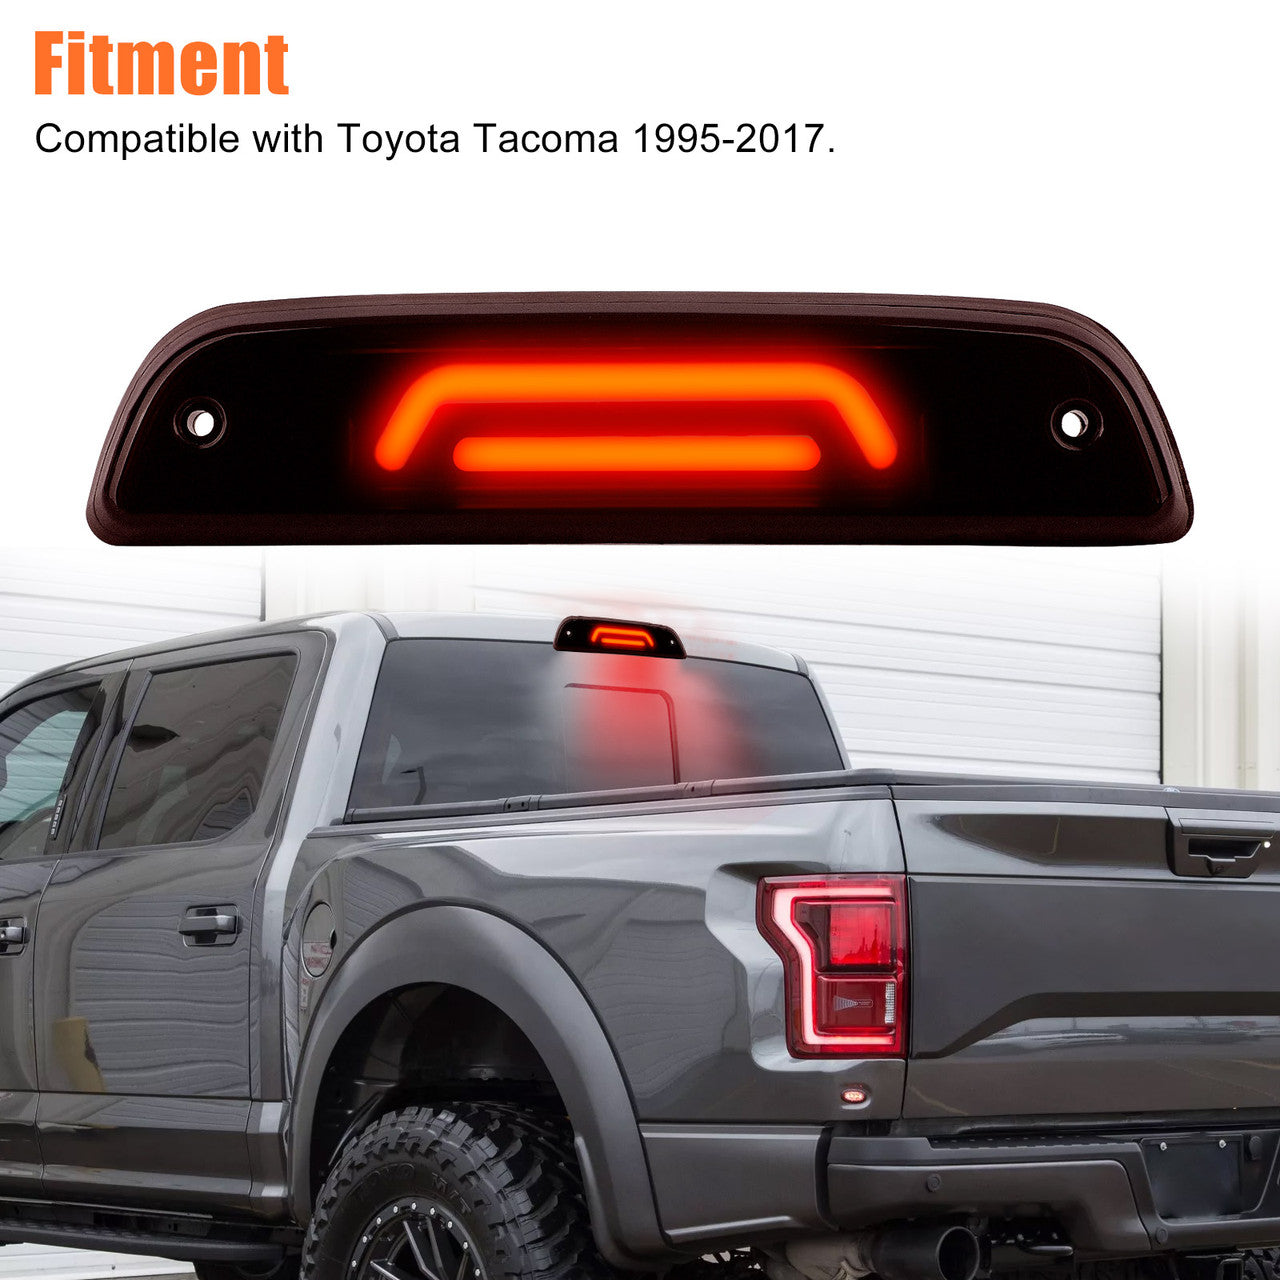 LED Third 3rd Rear Brake Light - Center High Mount Stop Lamp Replacement For Toyota Tacoma 1995-2017